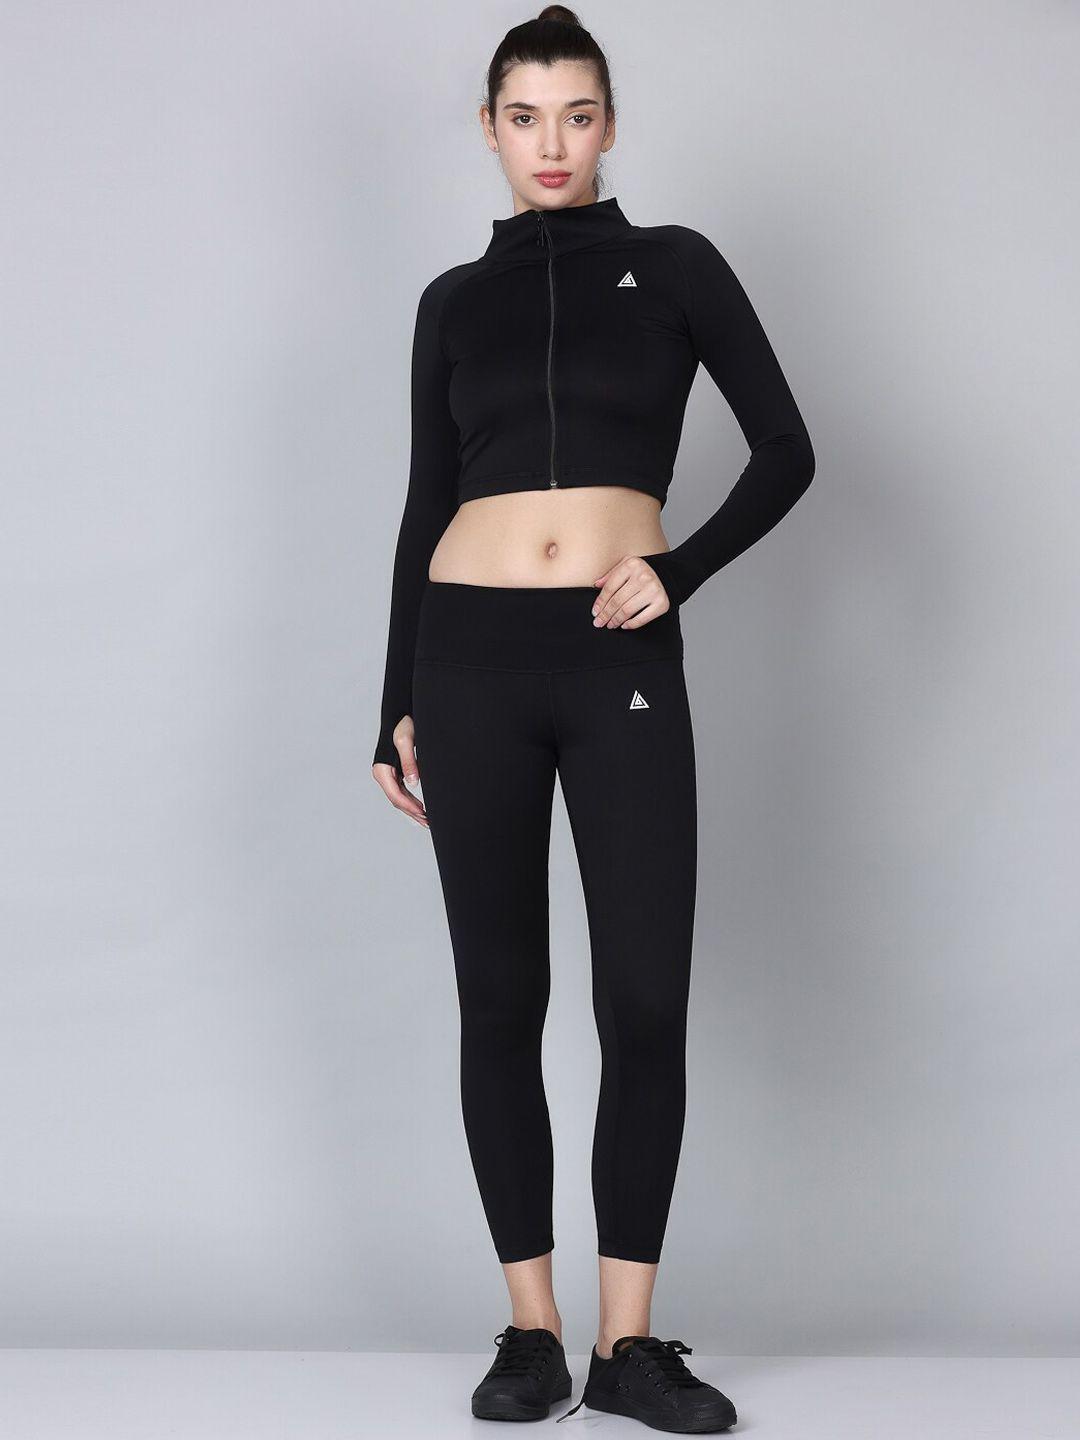 aesthetic bodies high neck zipper jacket with leggings gym co-ords